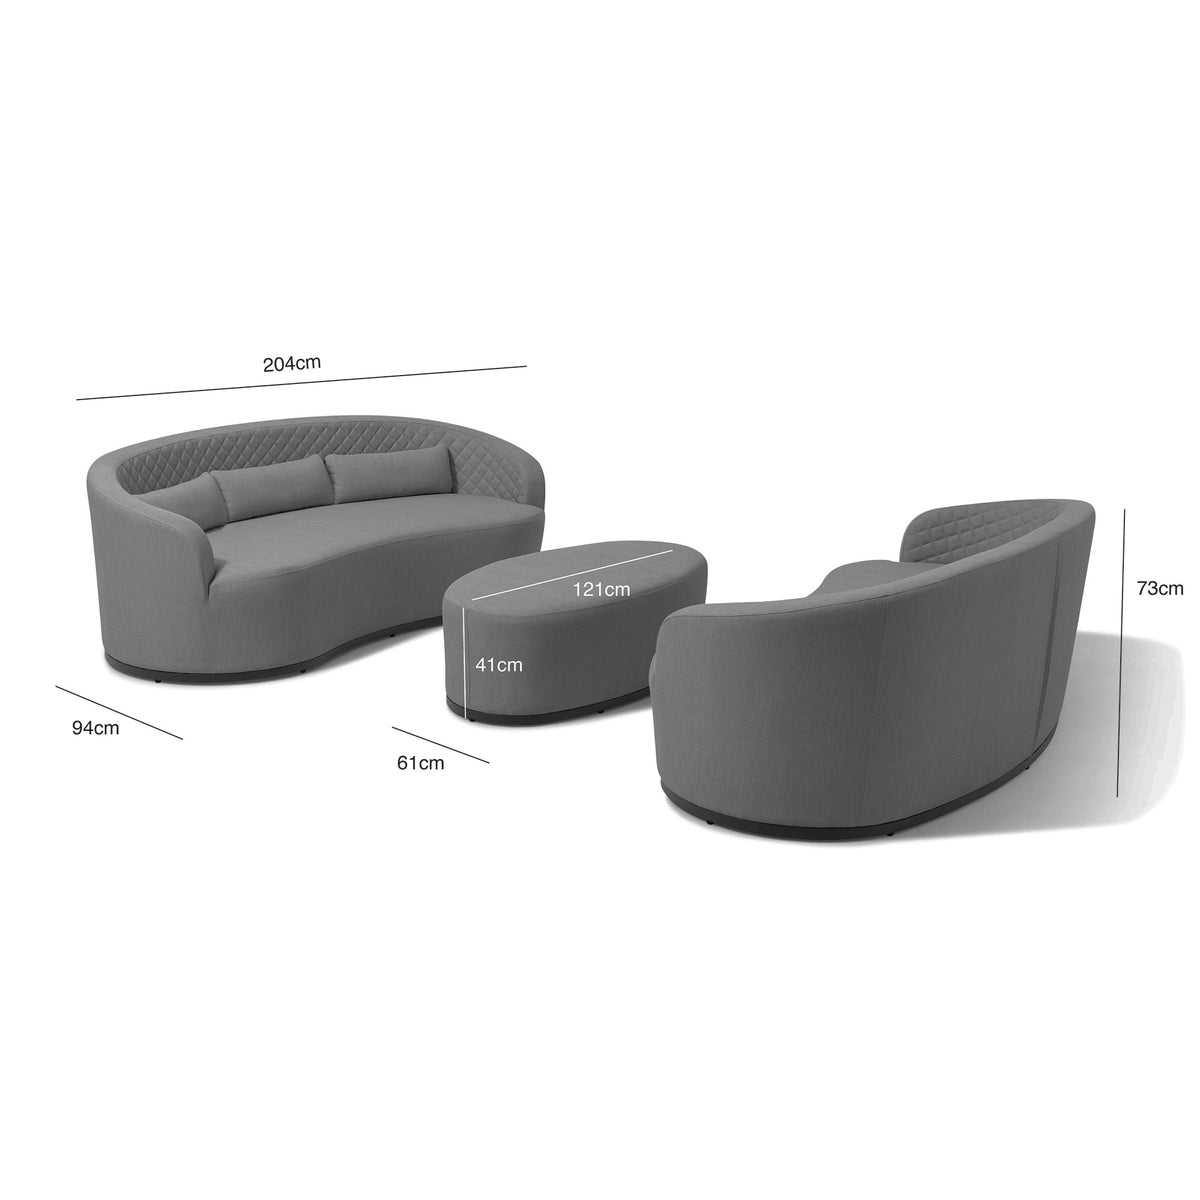 Maze Ambition Curve 3 Seater Sofa Daybed with Footstool